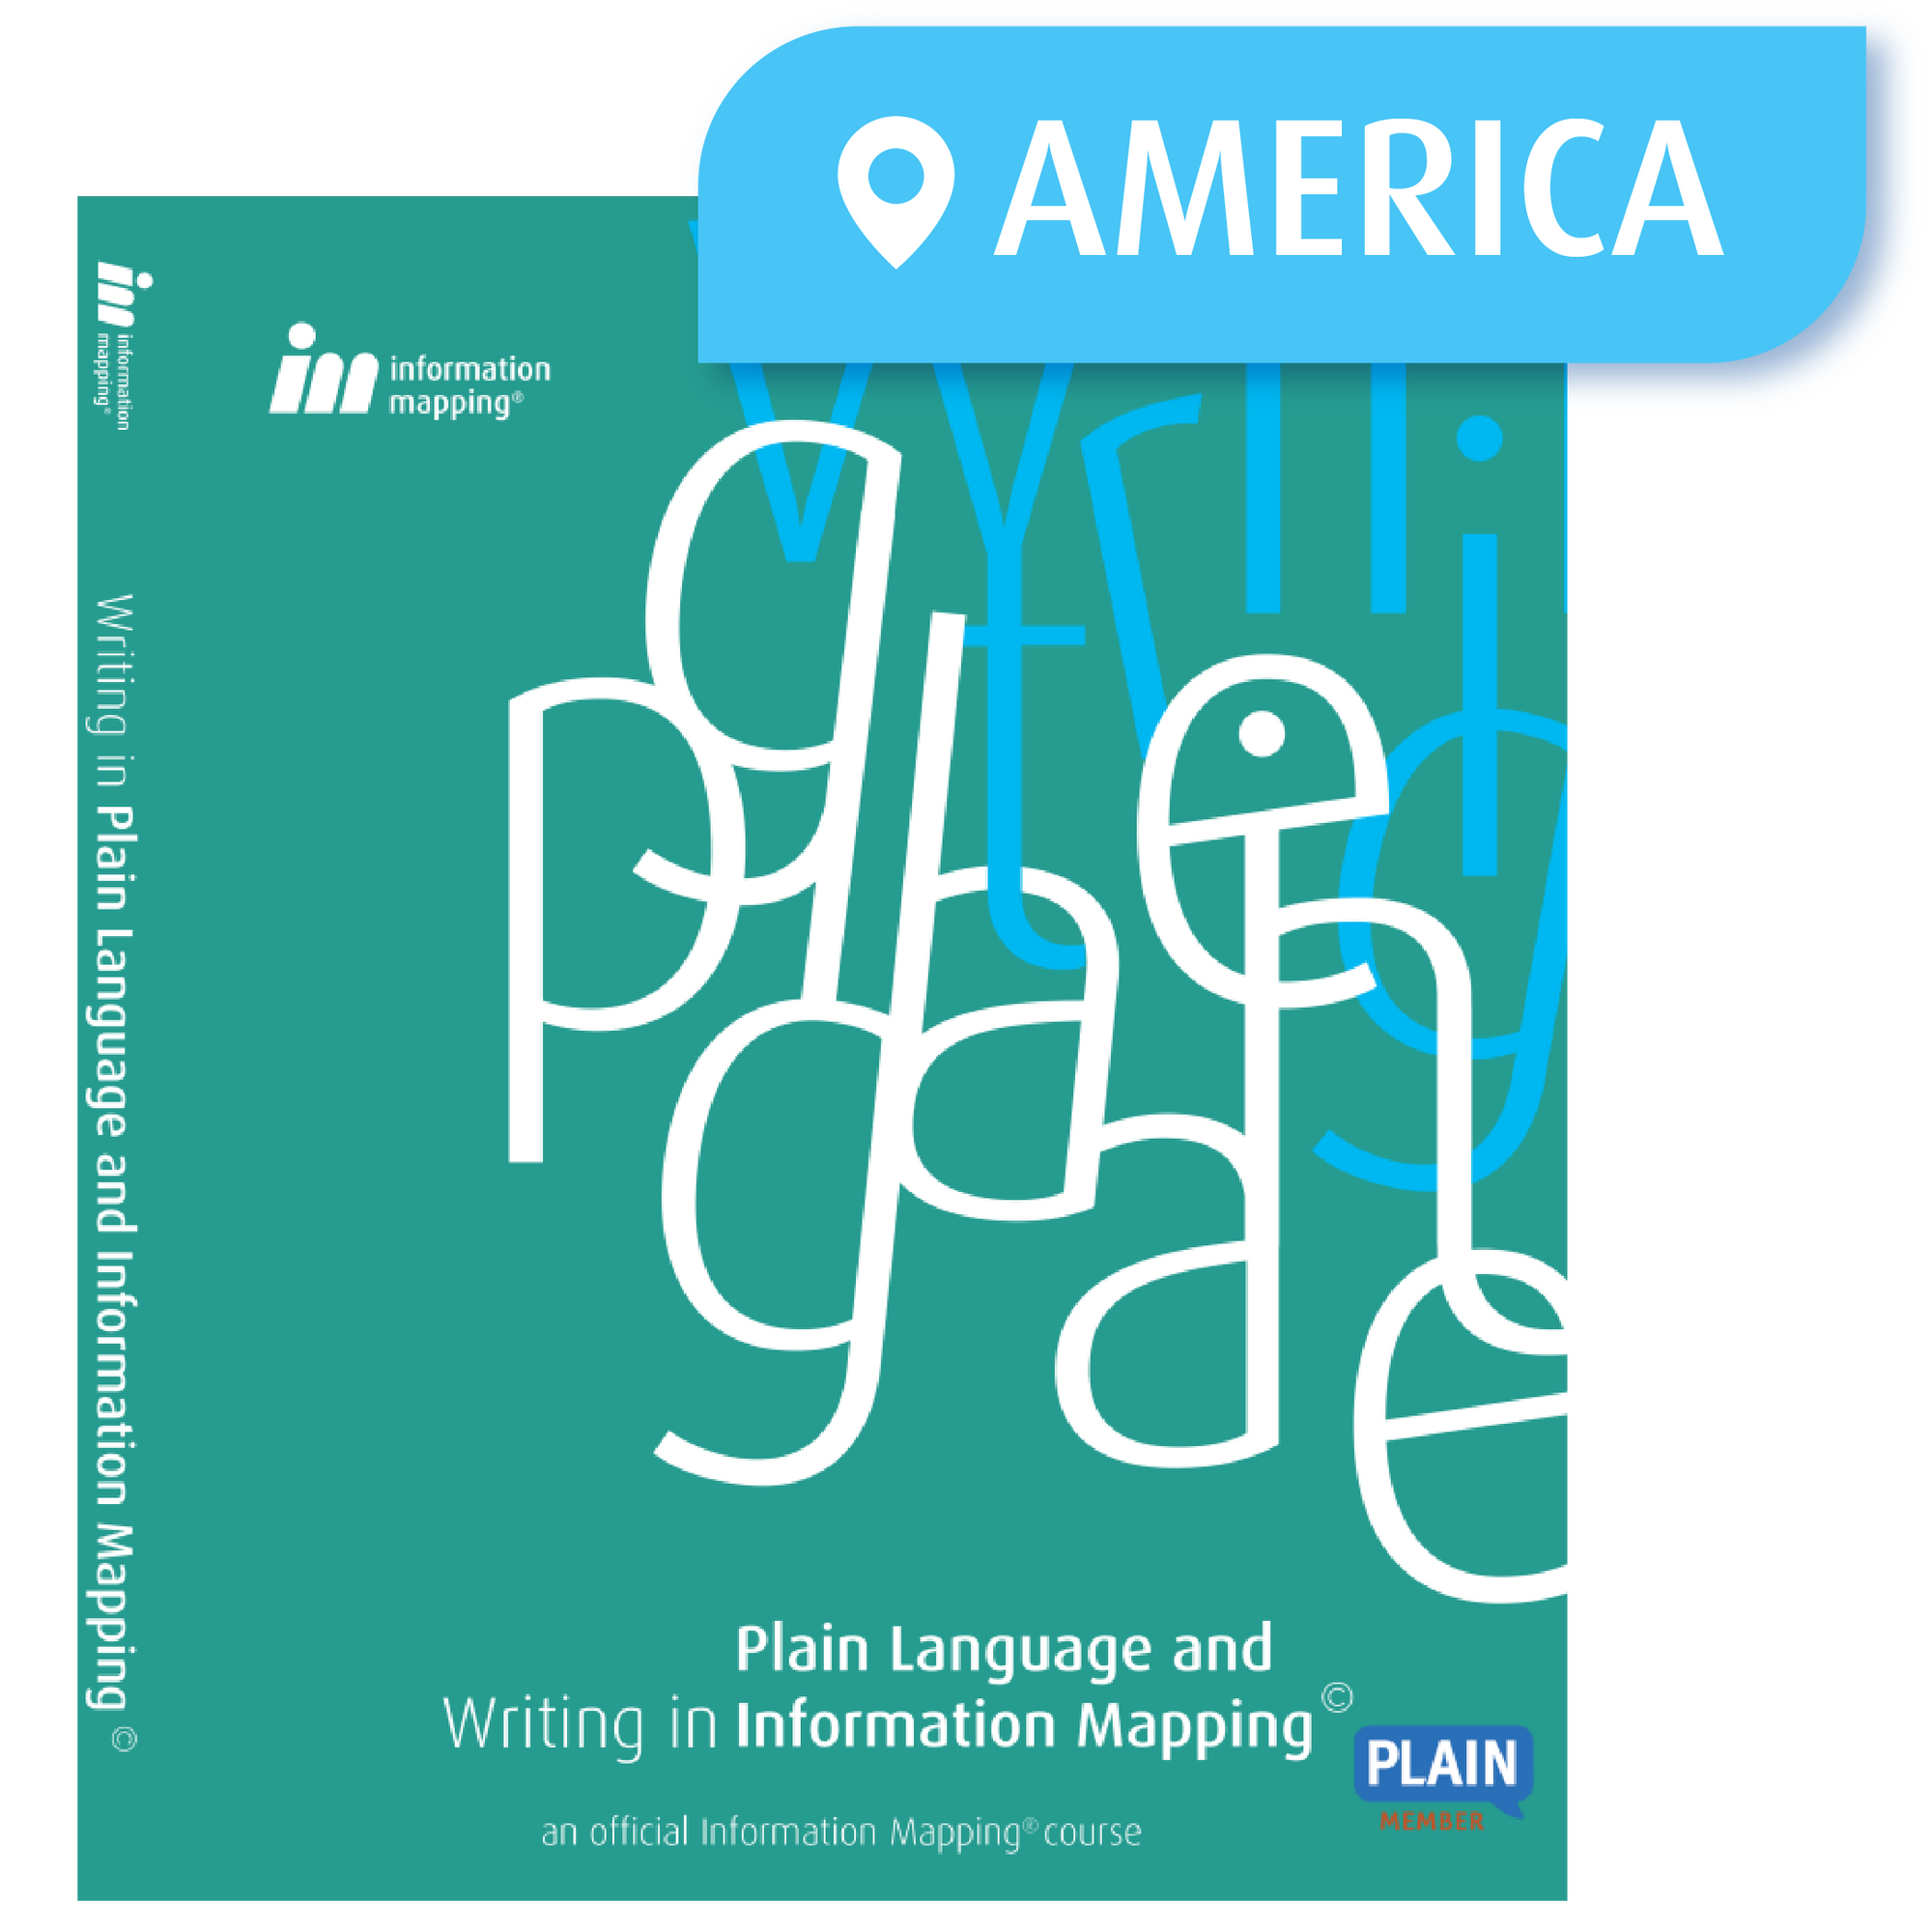 January 22-25, 2024 - Virtual Public Course: Writing in Plain Language and Information Mapping®